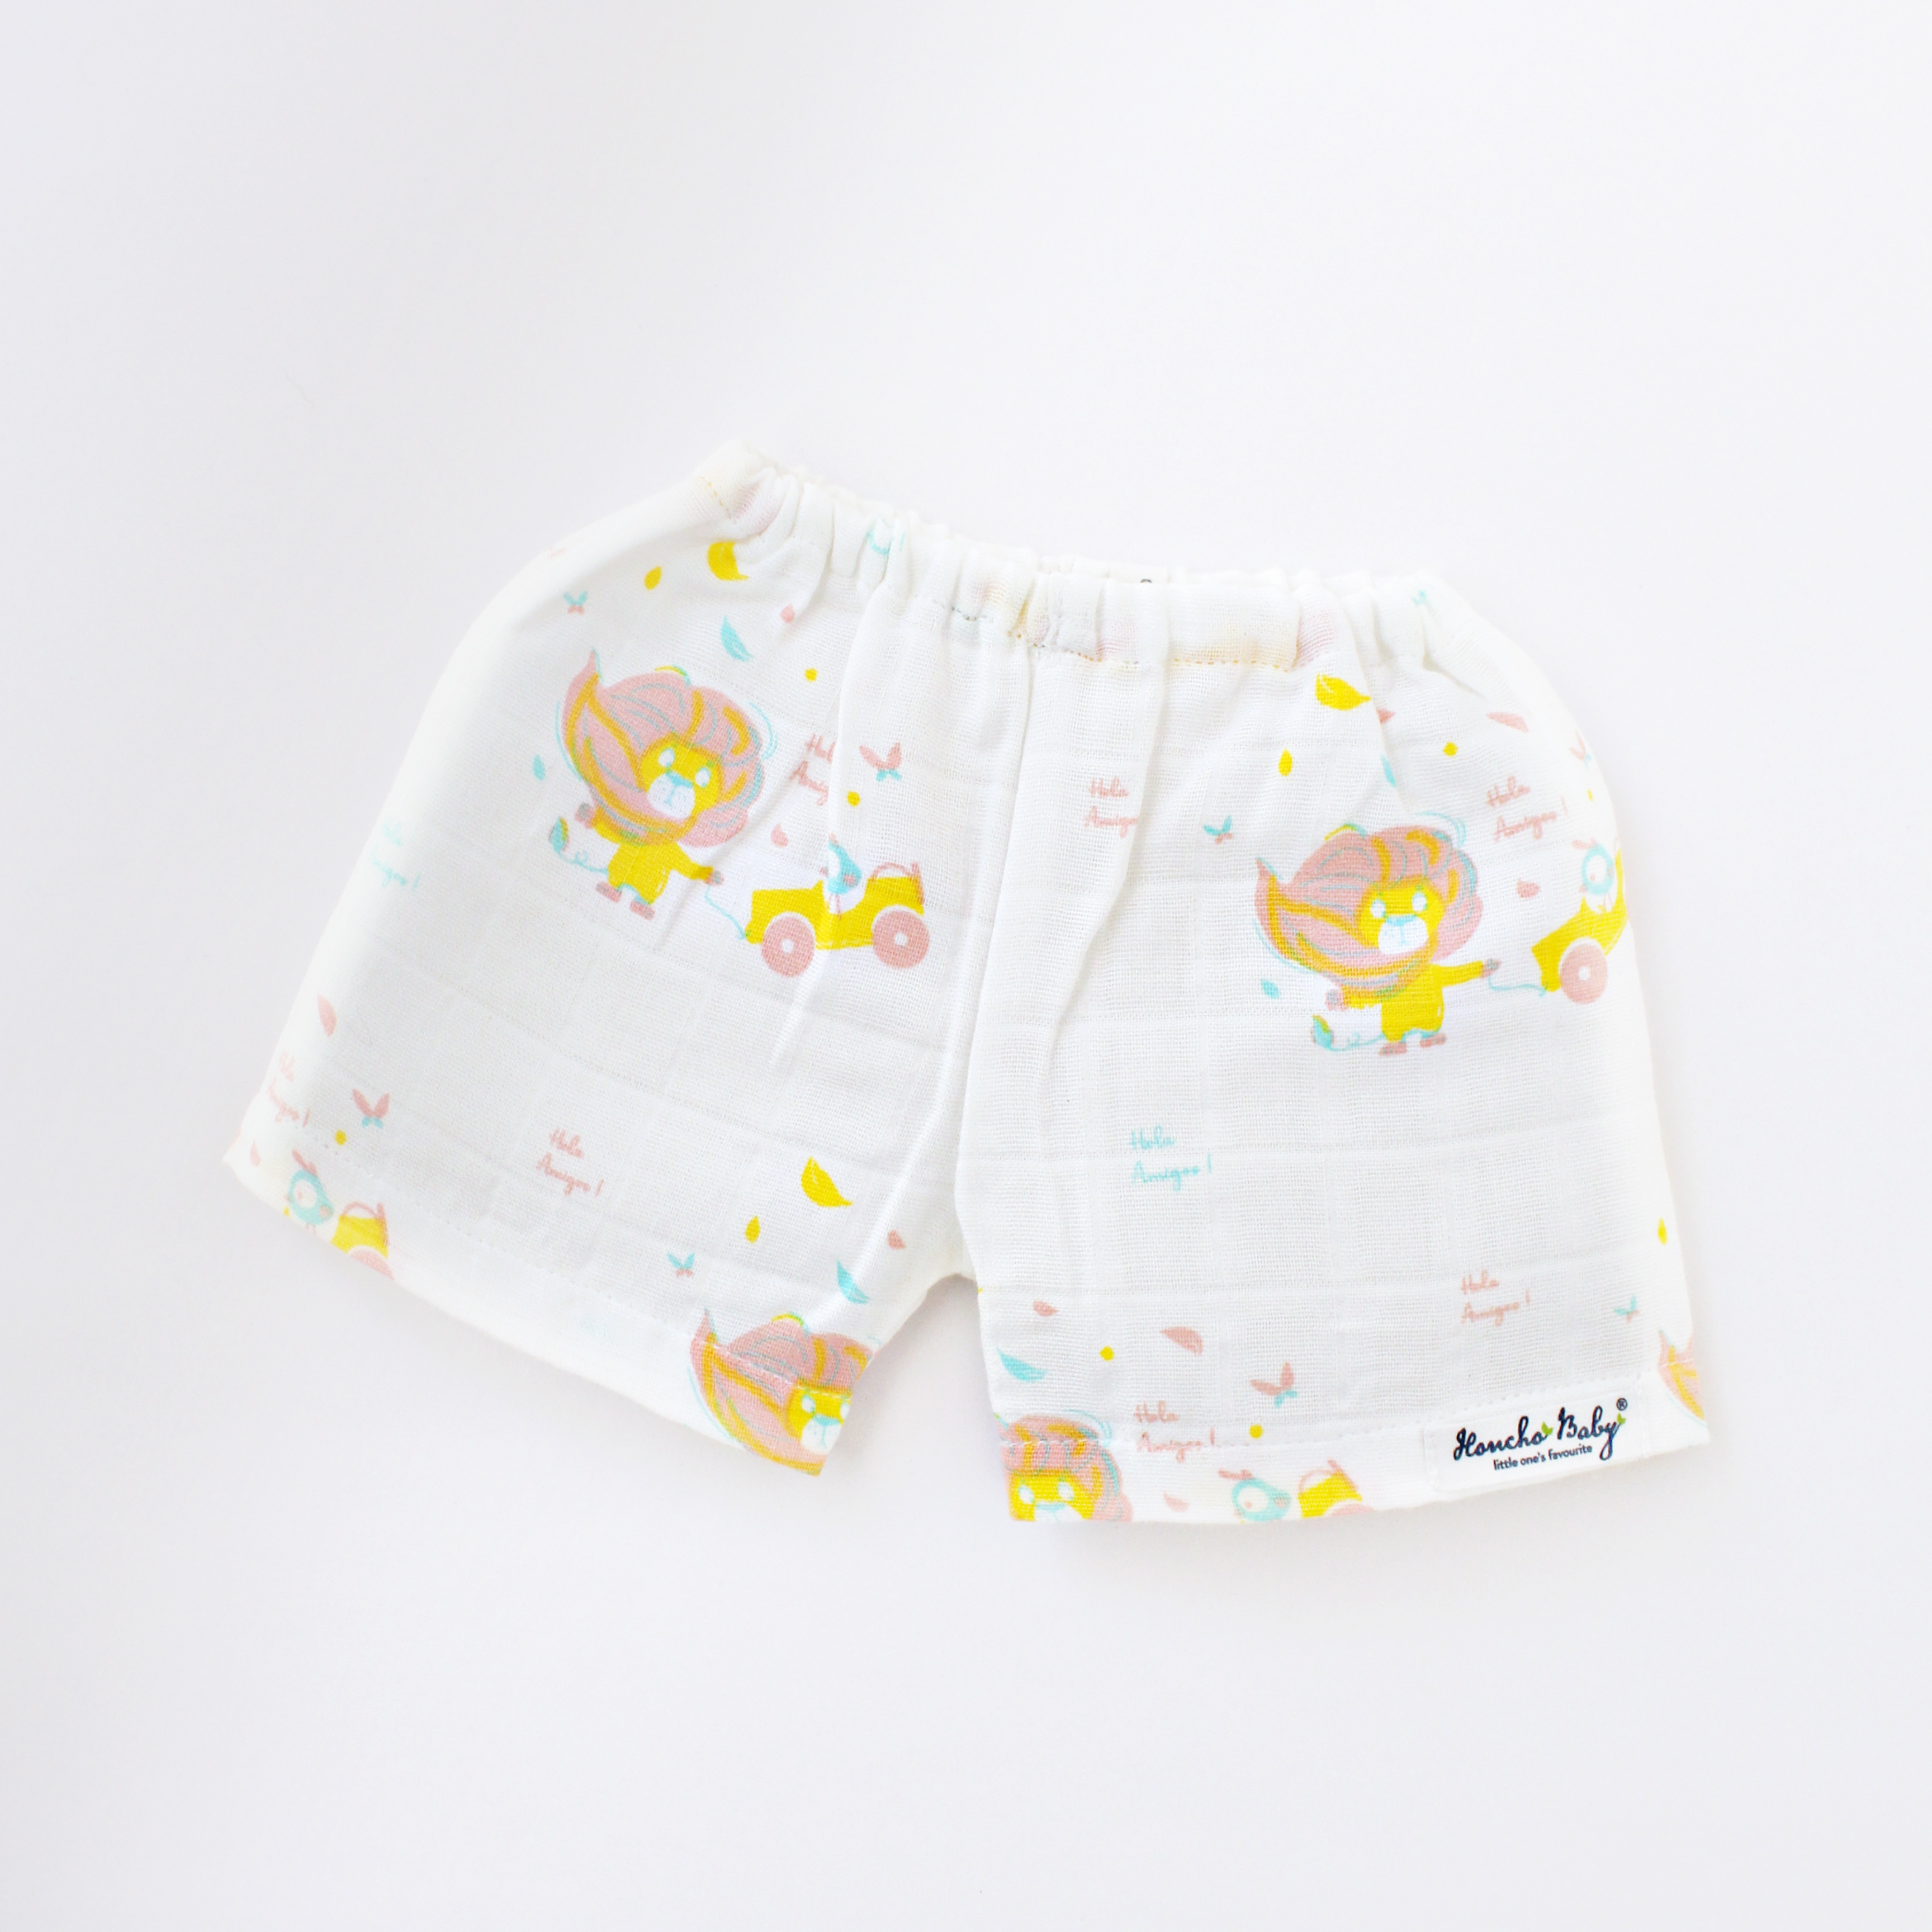 Muslin Unisex Shorts- Daily Wear (0 - 3 years) Assorted Pack of 3 - NEW